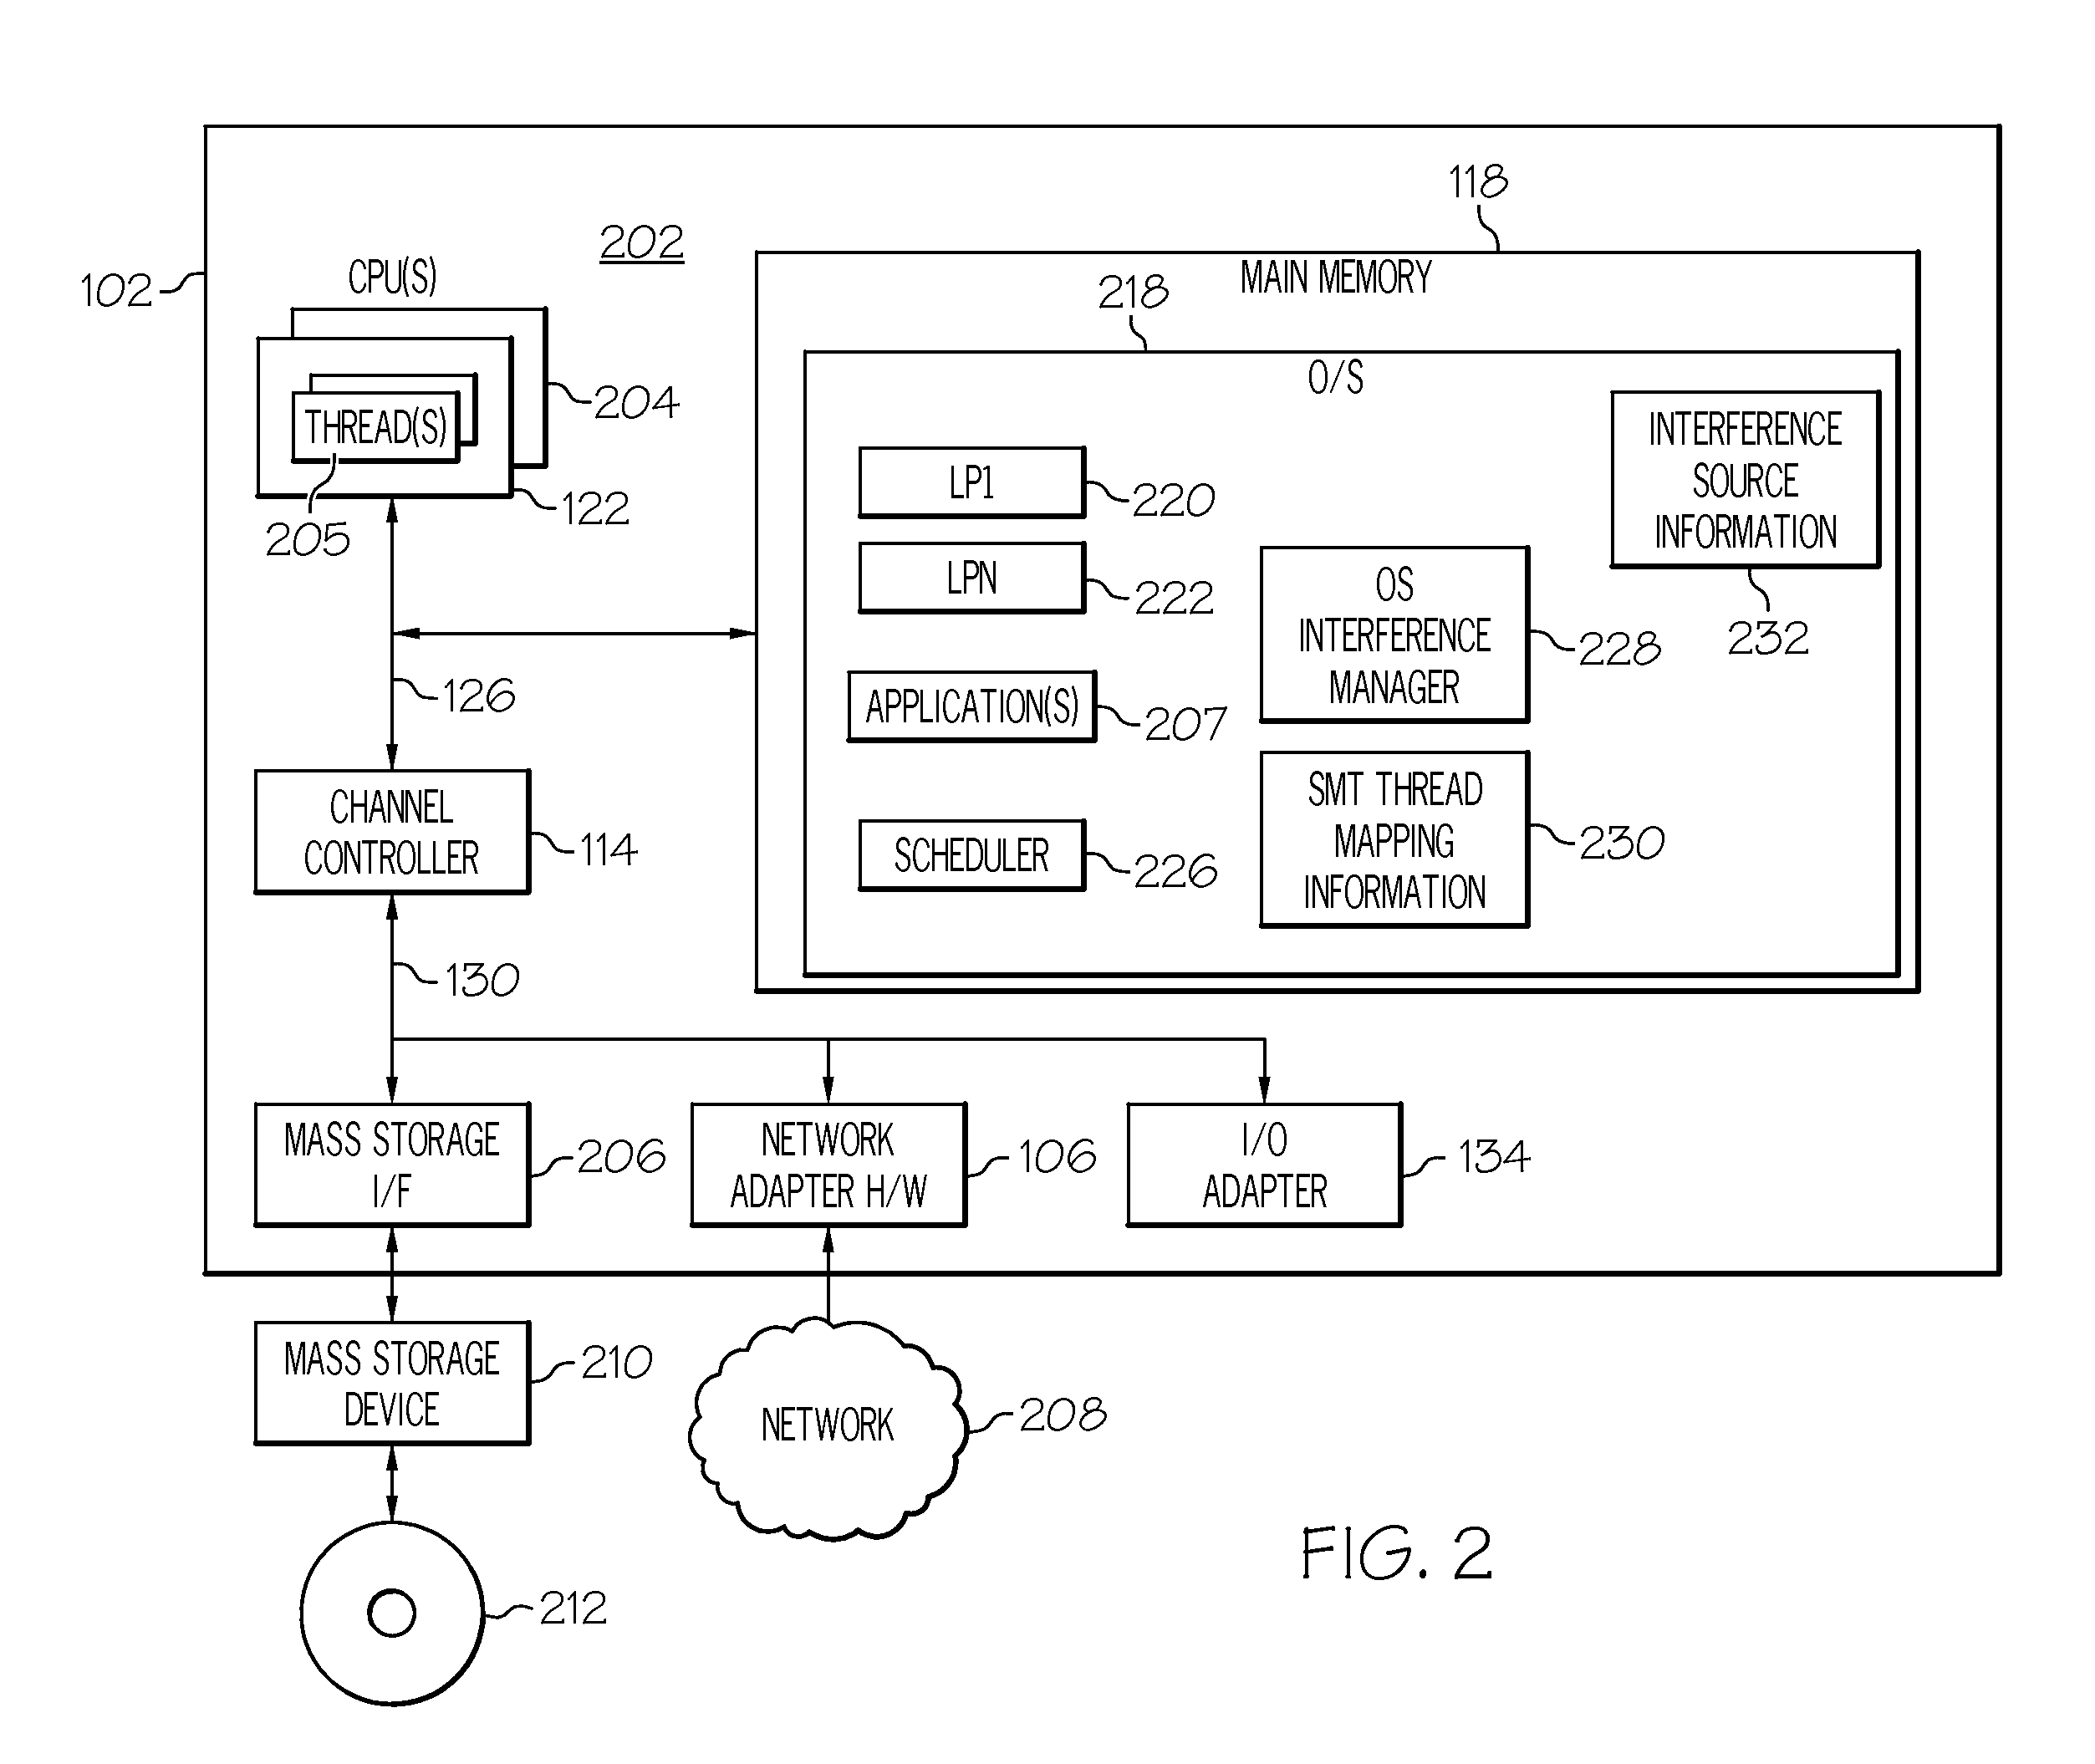 Hardware multi-threading co-scheduling for parallel processing systems